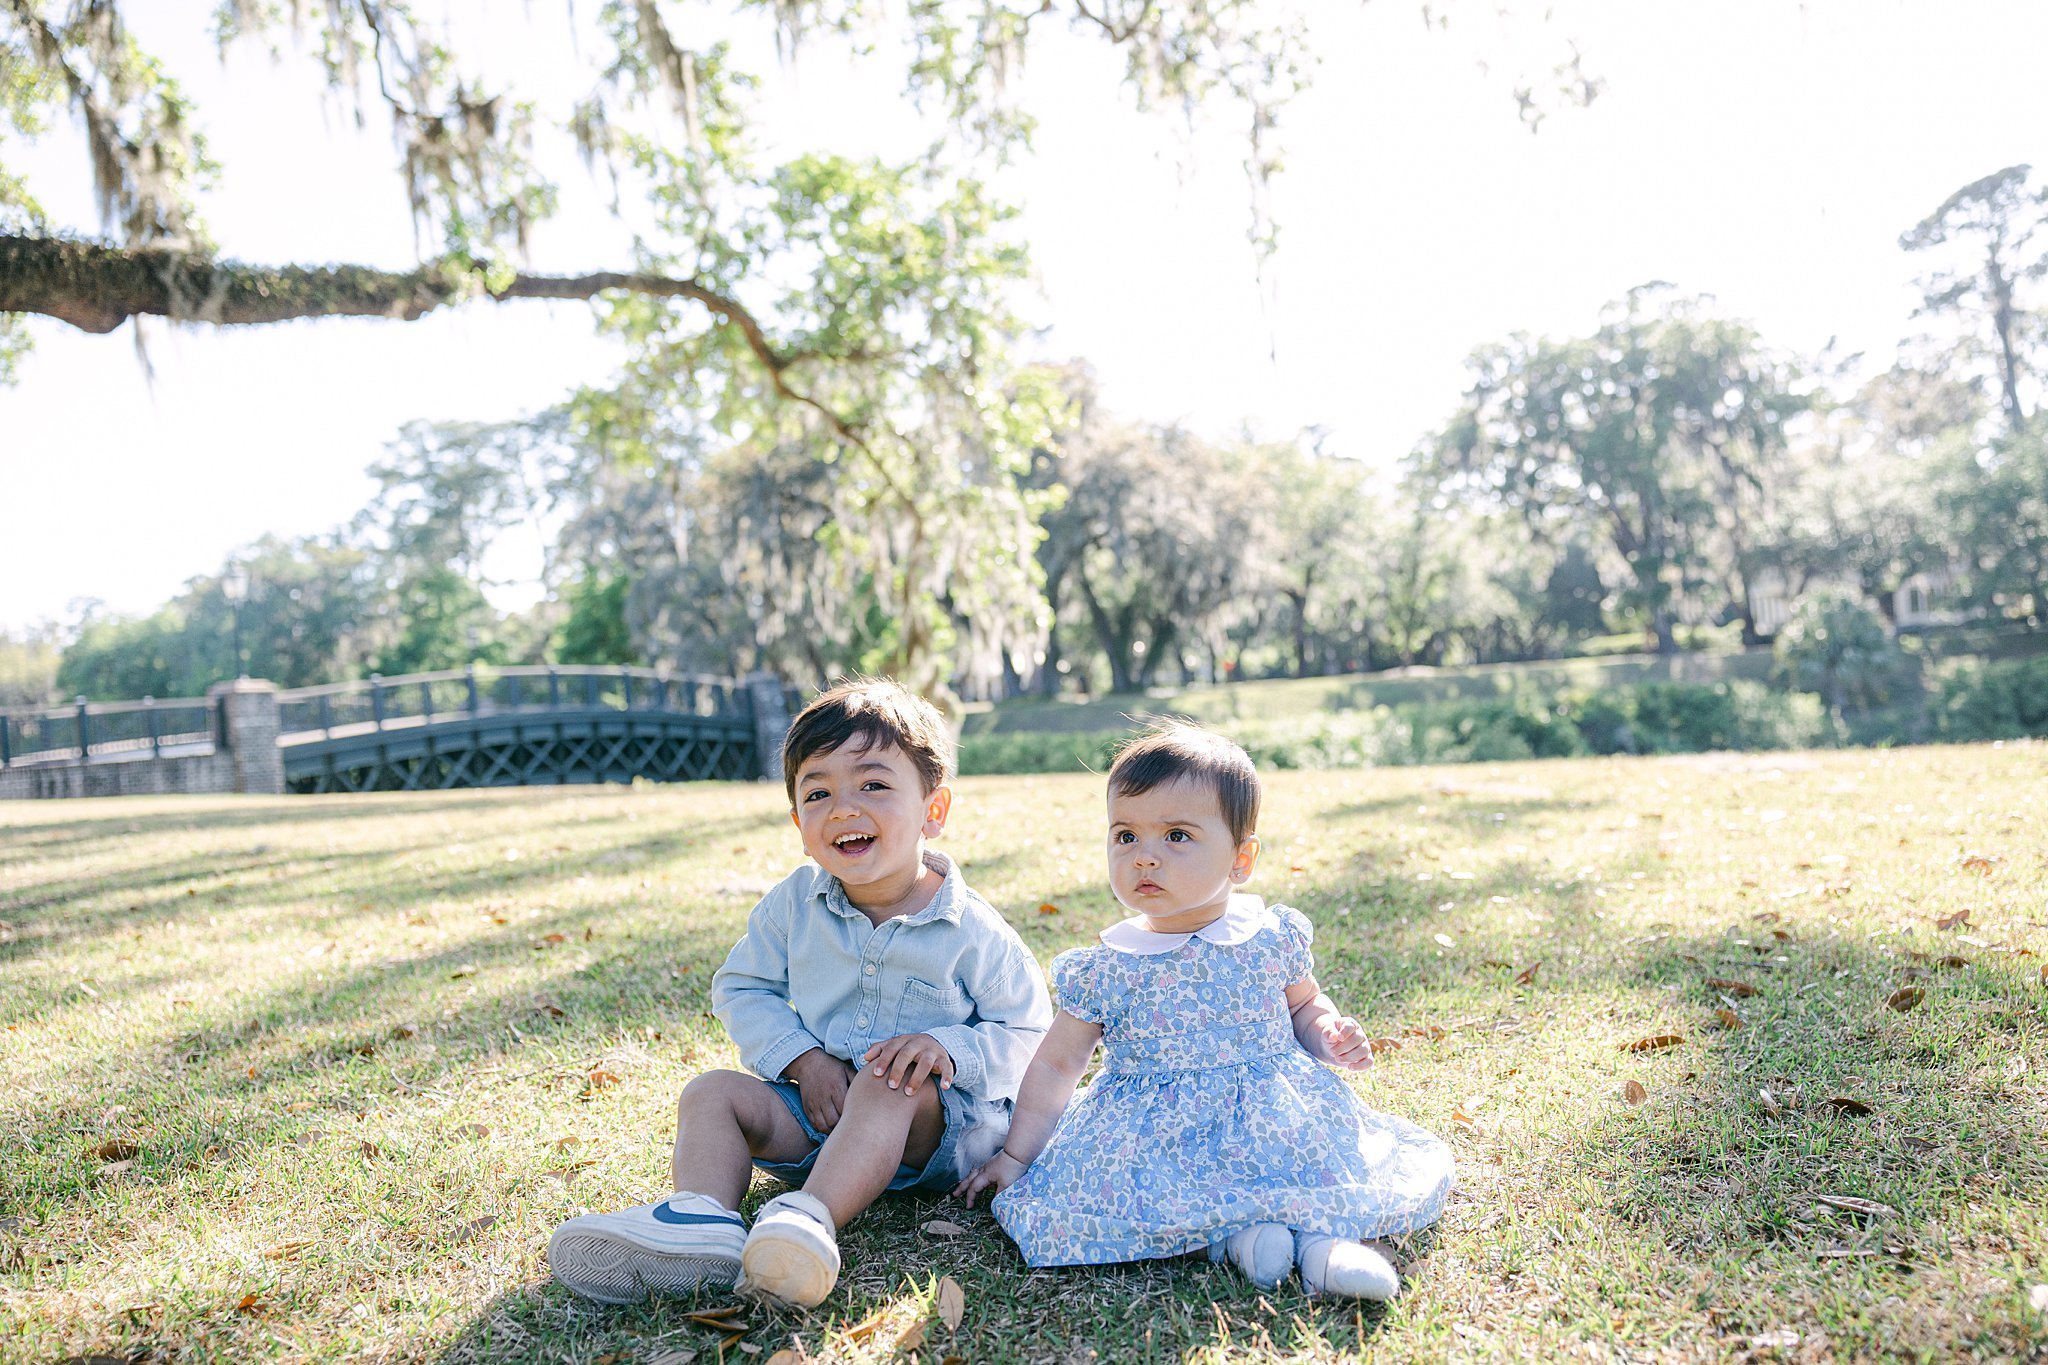 Katherine_Ives_Photography_Montage_Palmetto_Bluff_Family_Session_76775.JPG